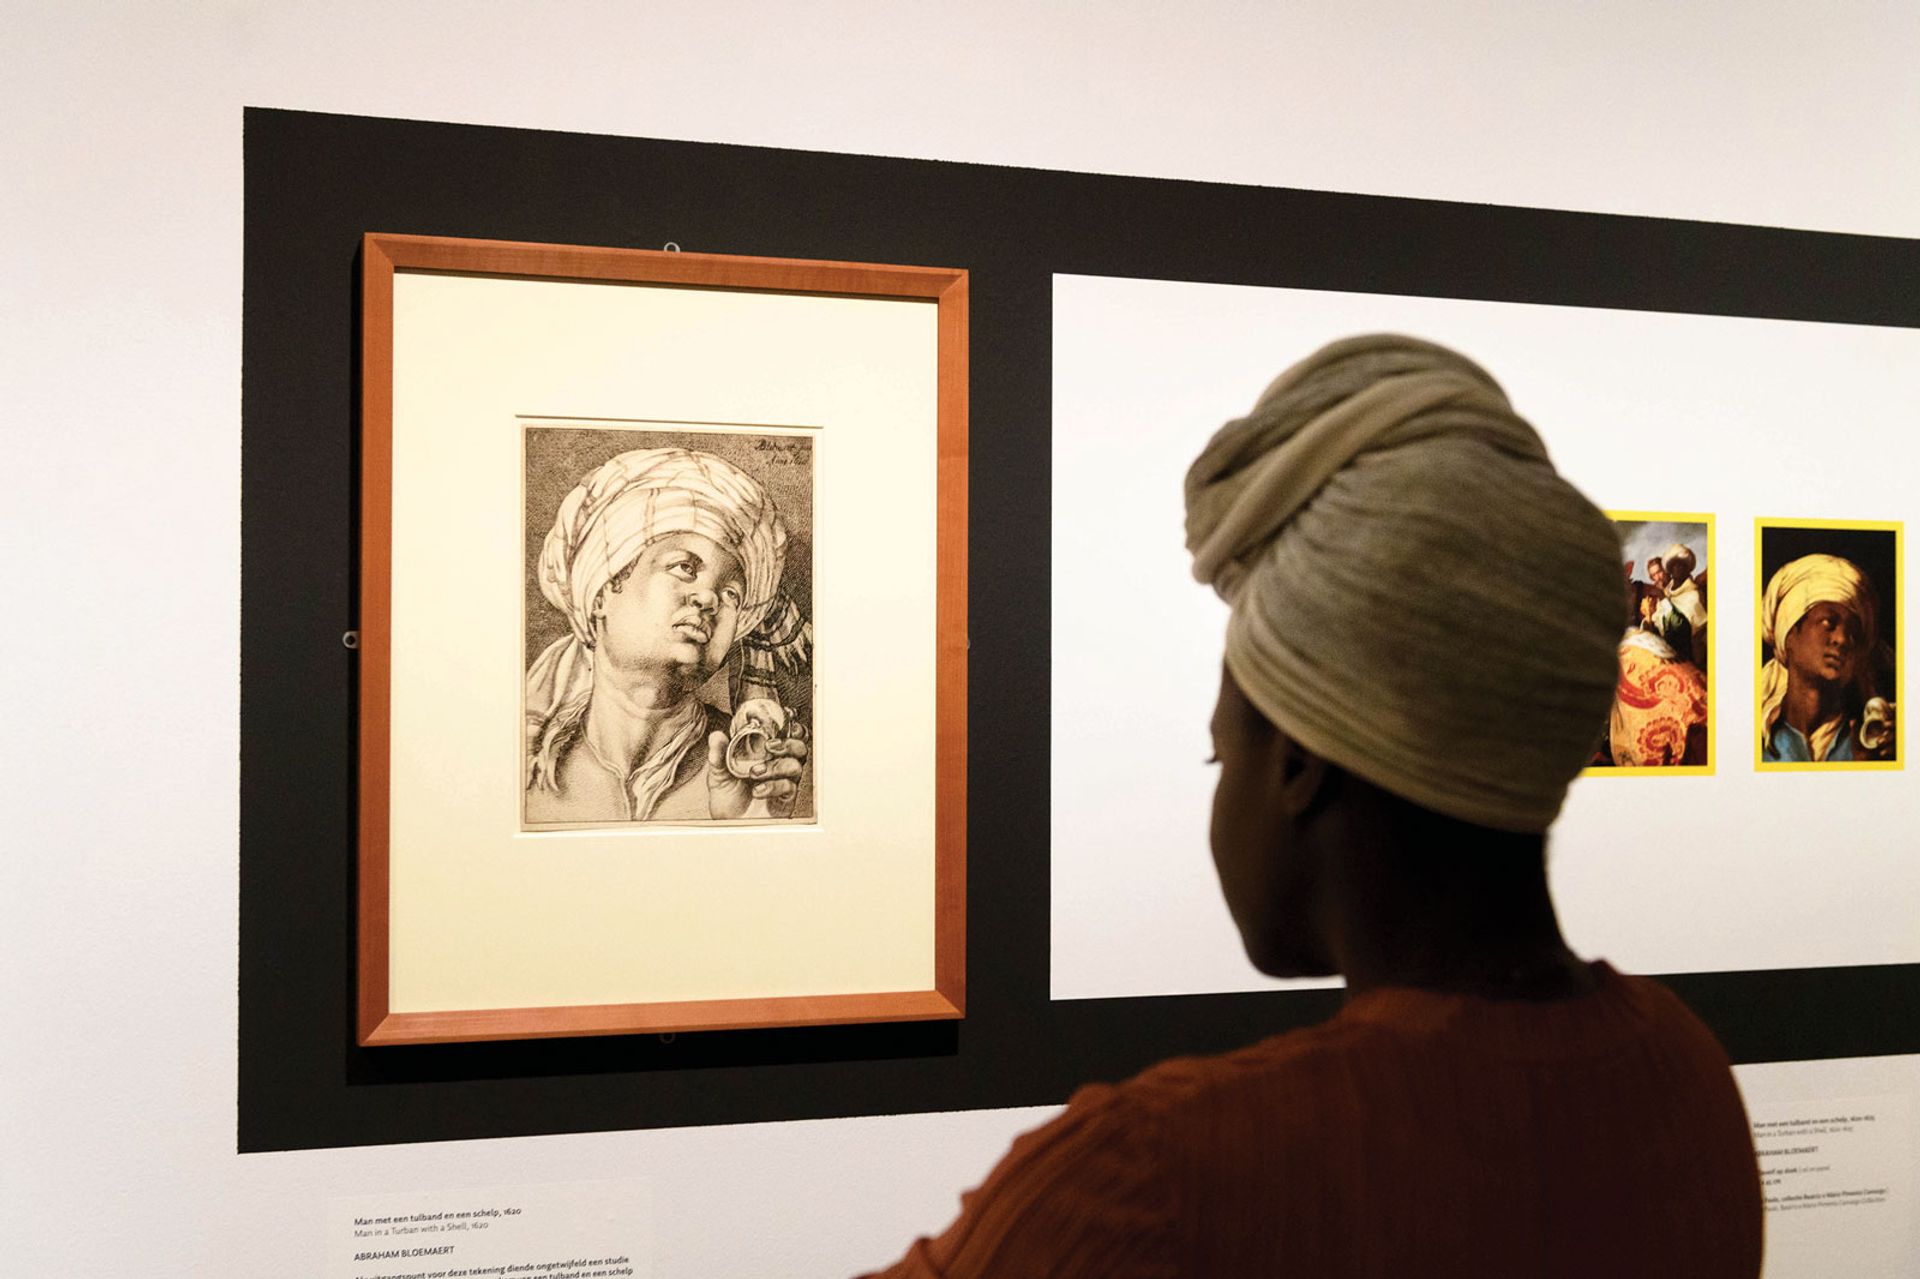 The exhibition Here: Black in Rembrandt’s Time at the Rembrandt House Museum in Amsterdam was the launching point for a network to advance diversity and inclusion in Dutch museums Photo: Mike Bink